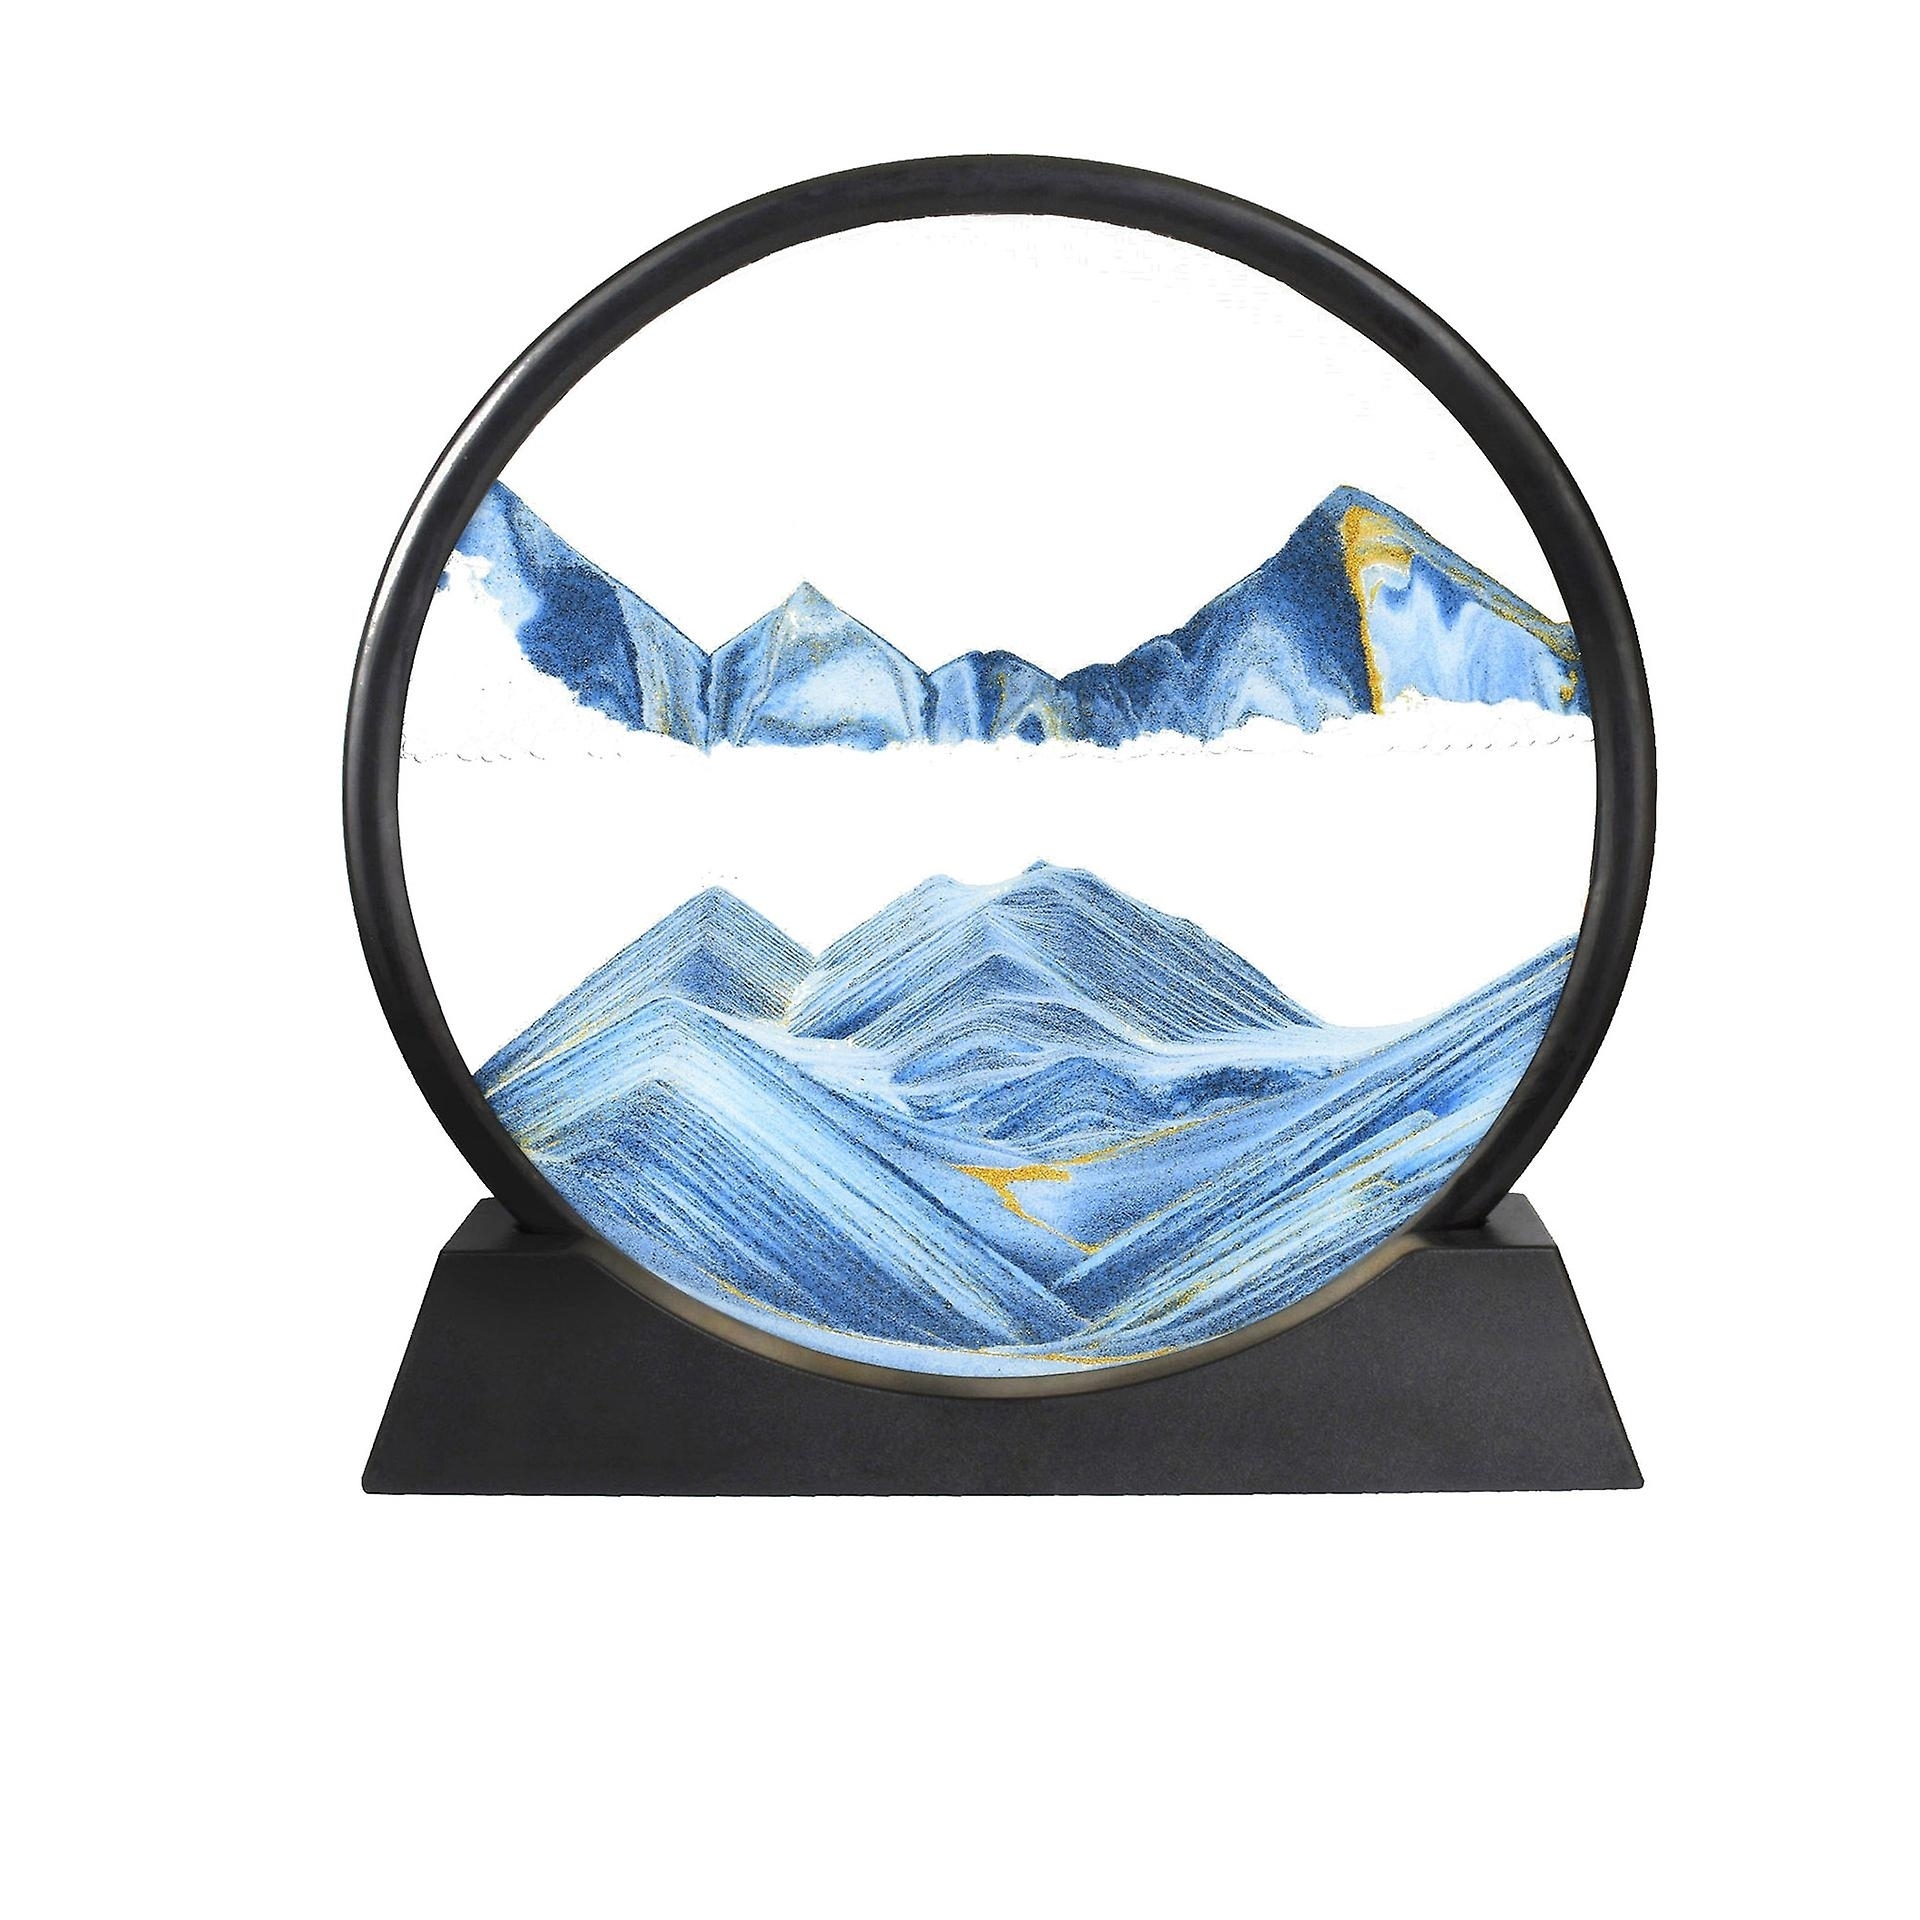 Moving Sand Art Picture Round Glass 3d Deep Sea Sandscape Flowing Sand Frame Home Decor - Blue, 7 inch